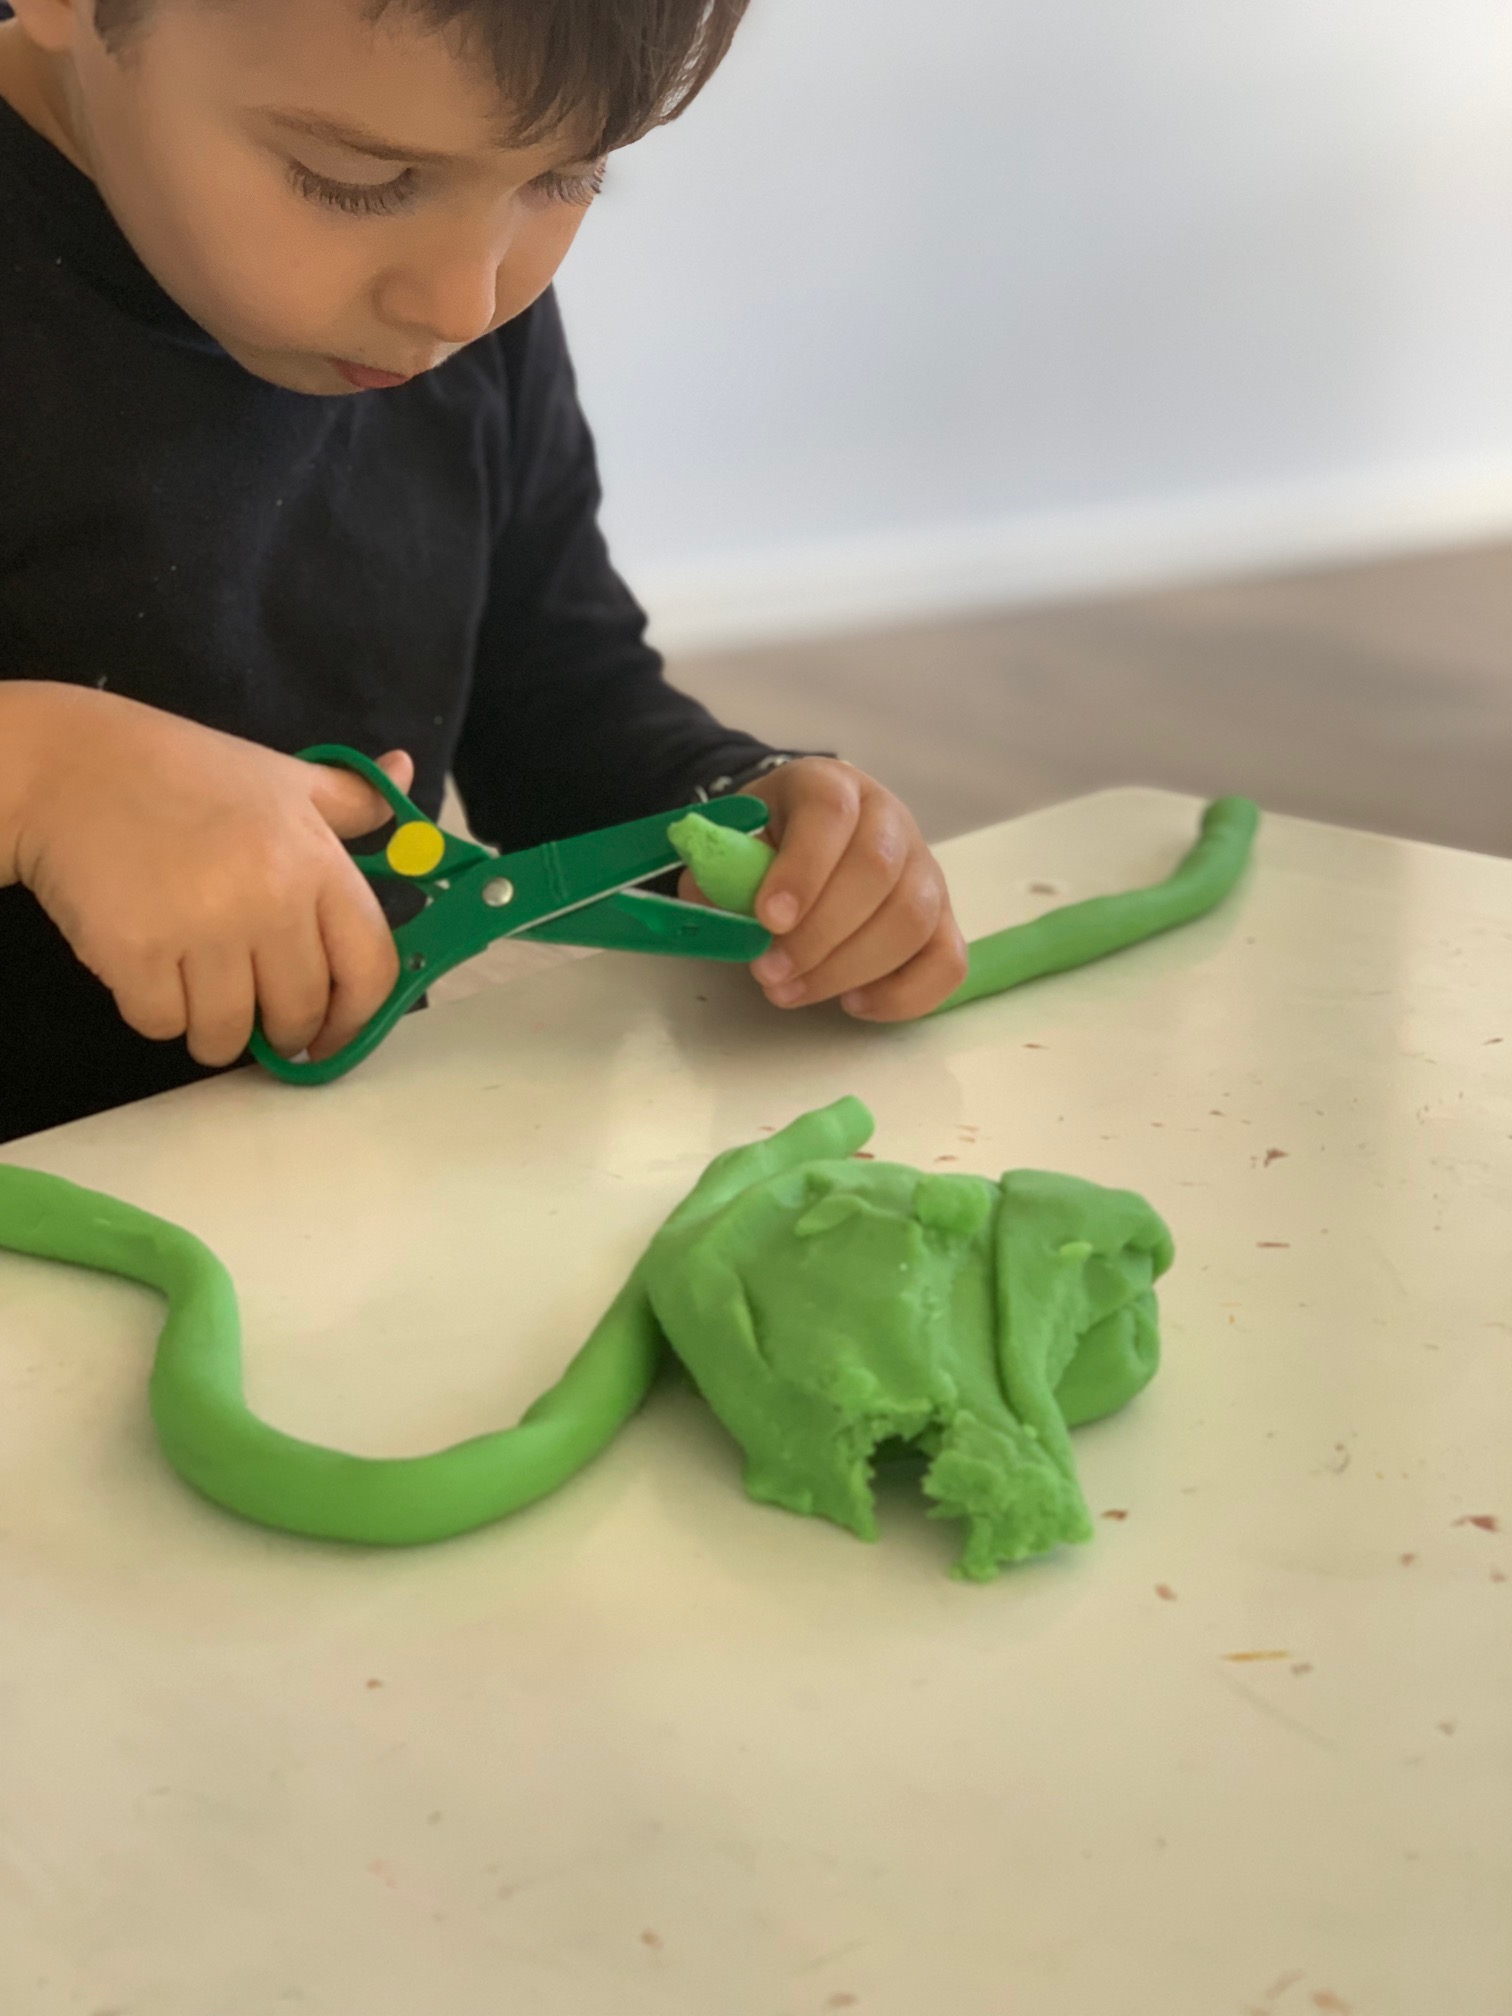 HoneyTree Early Learning Centers Lewis-Gale - Playdough fun with scissors  is a great first step towards the all important paper cutting mastery.  Start with plastic playdough scissors, and after teaching scissor safety